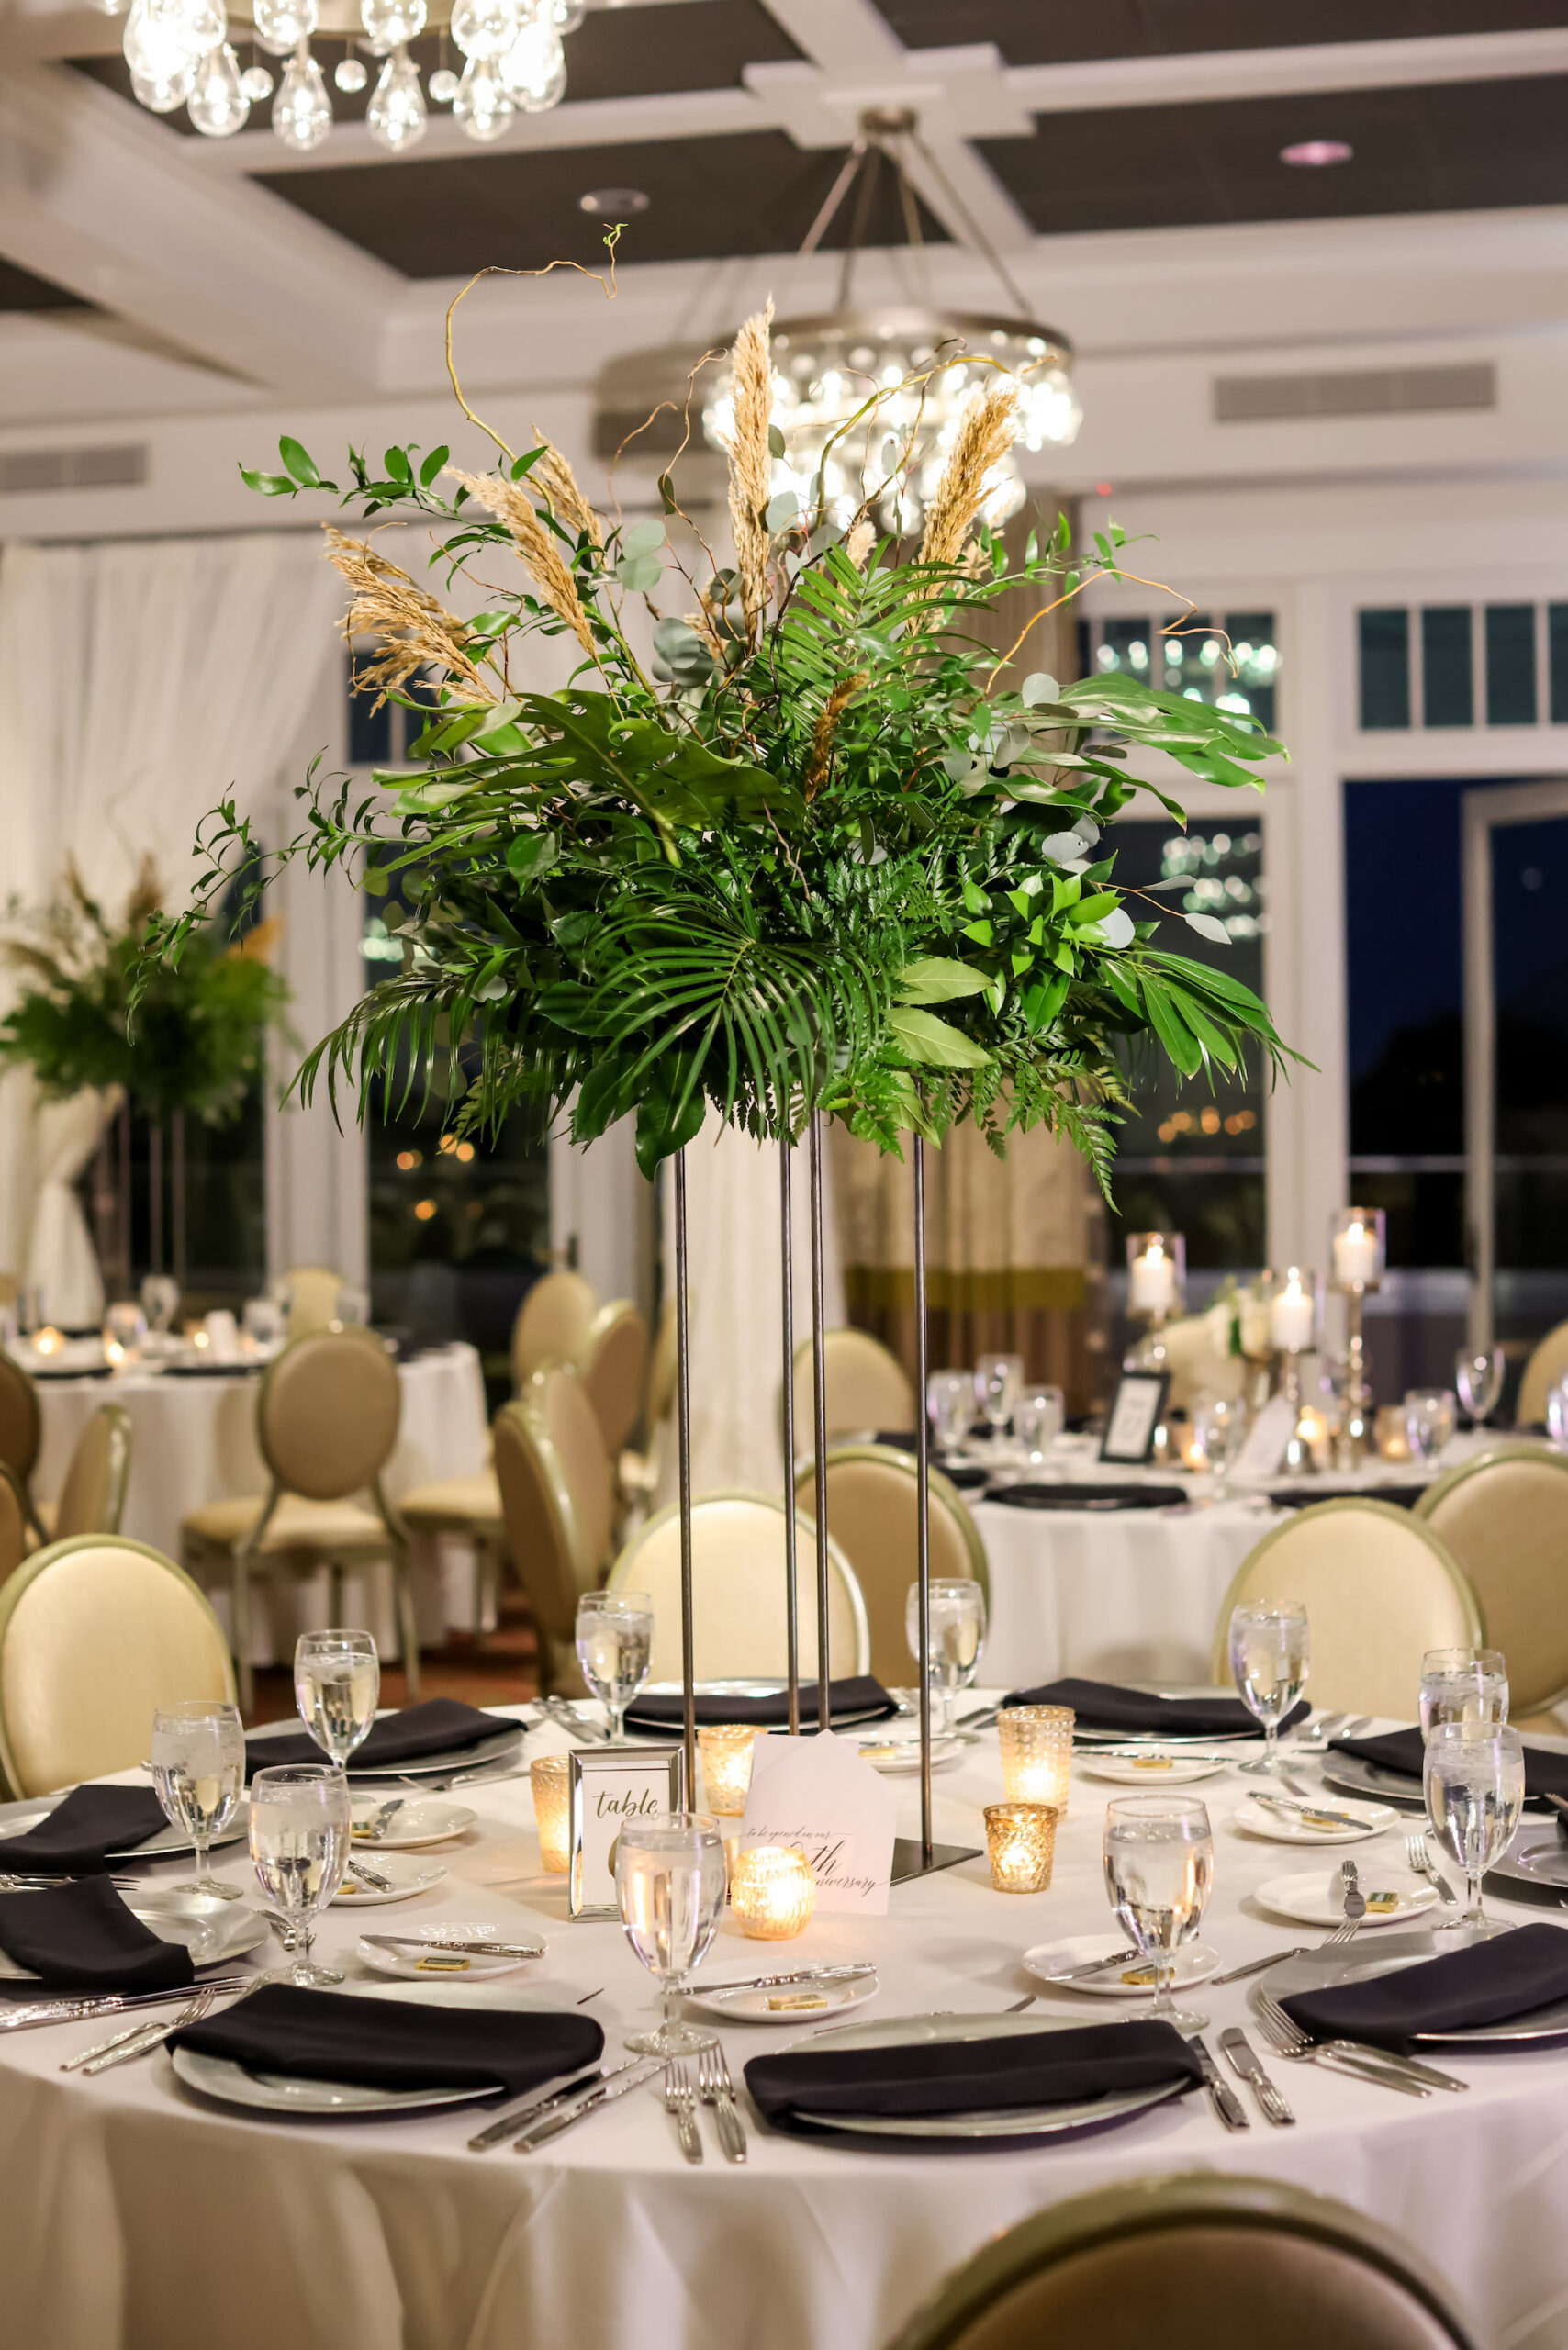 Classic Wedding Reception Ballroom with Cream and Gold Chairs and Tall Greenery Centerpieces Ideas | Downtown St. Pete Venue The Birchwood